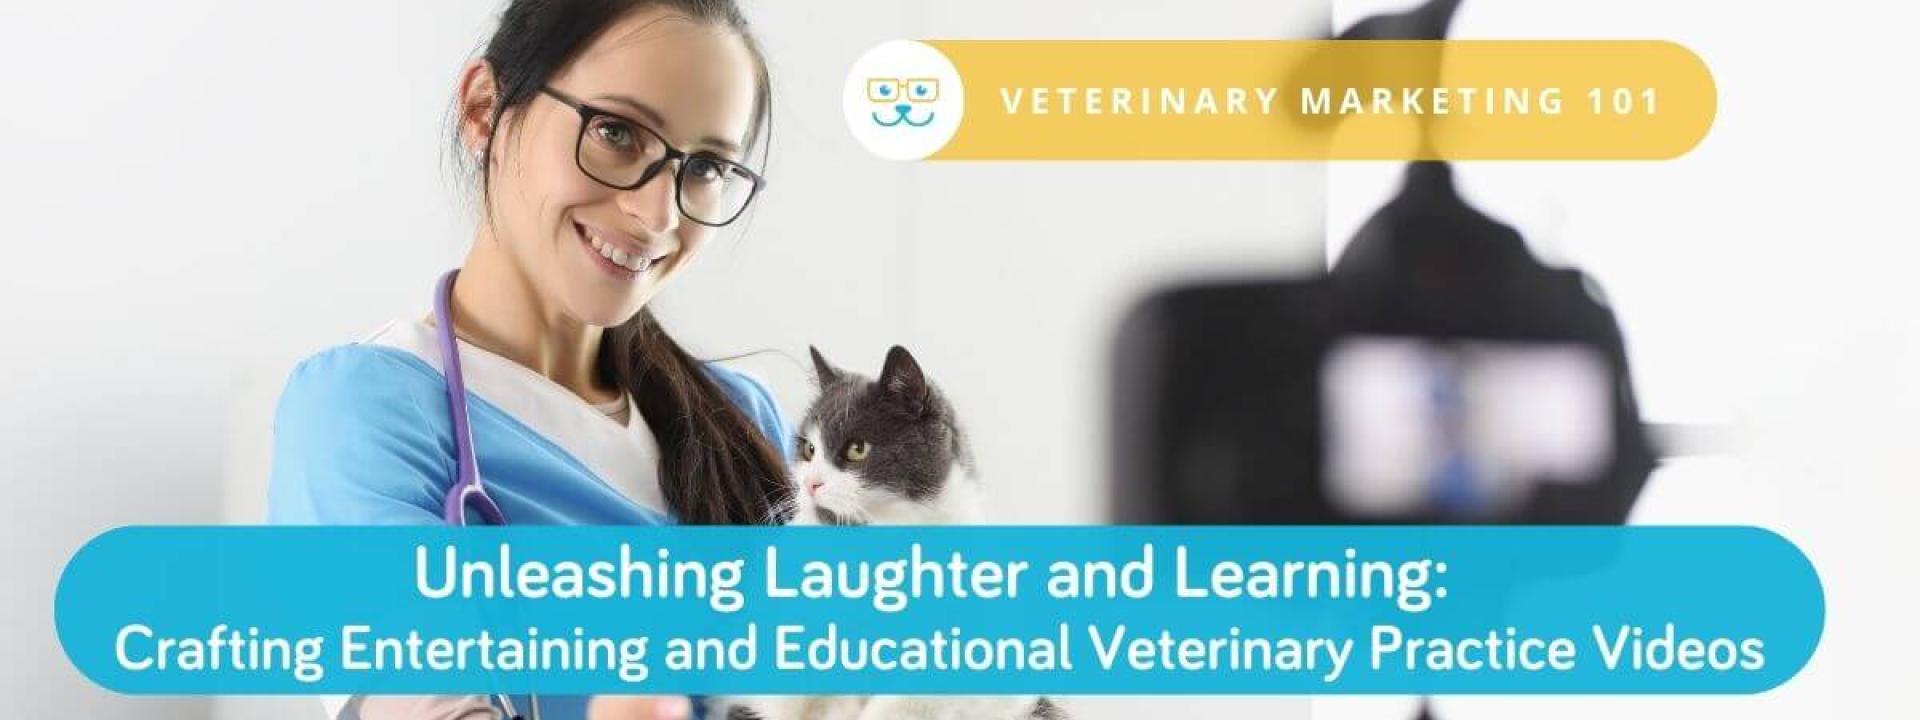 Unleashing Laughter and Learning: Crafting Entertaining and Educational Veterinary Practice Videos